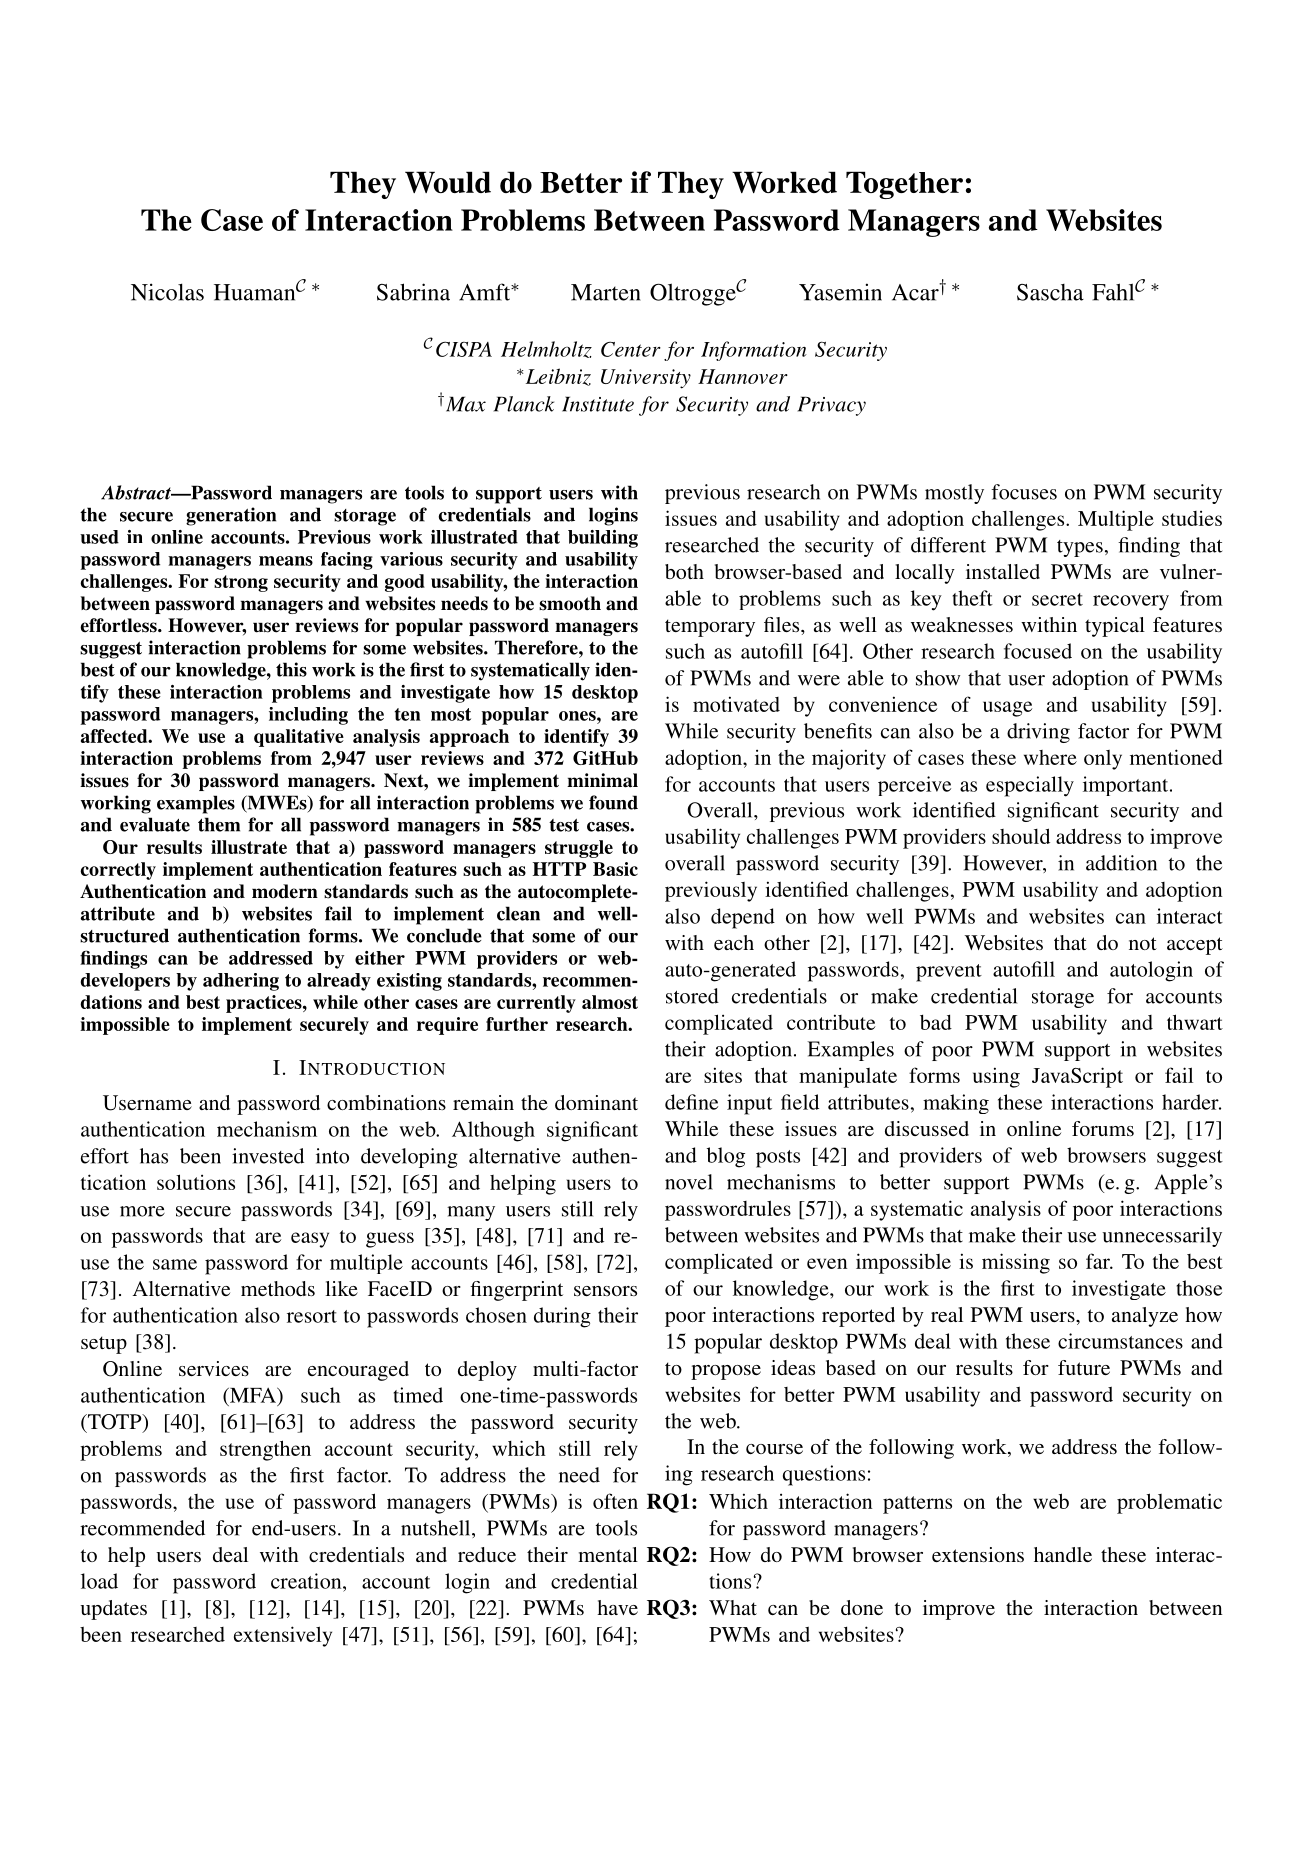 Image of the first Page of the PDF